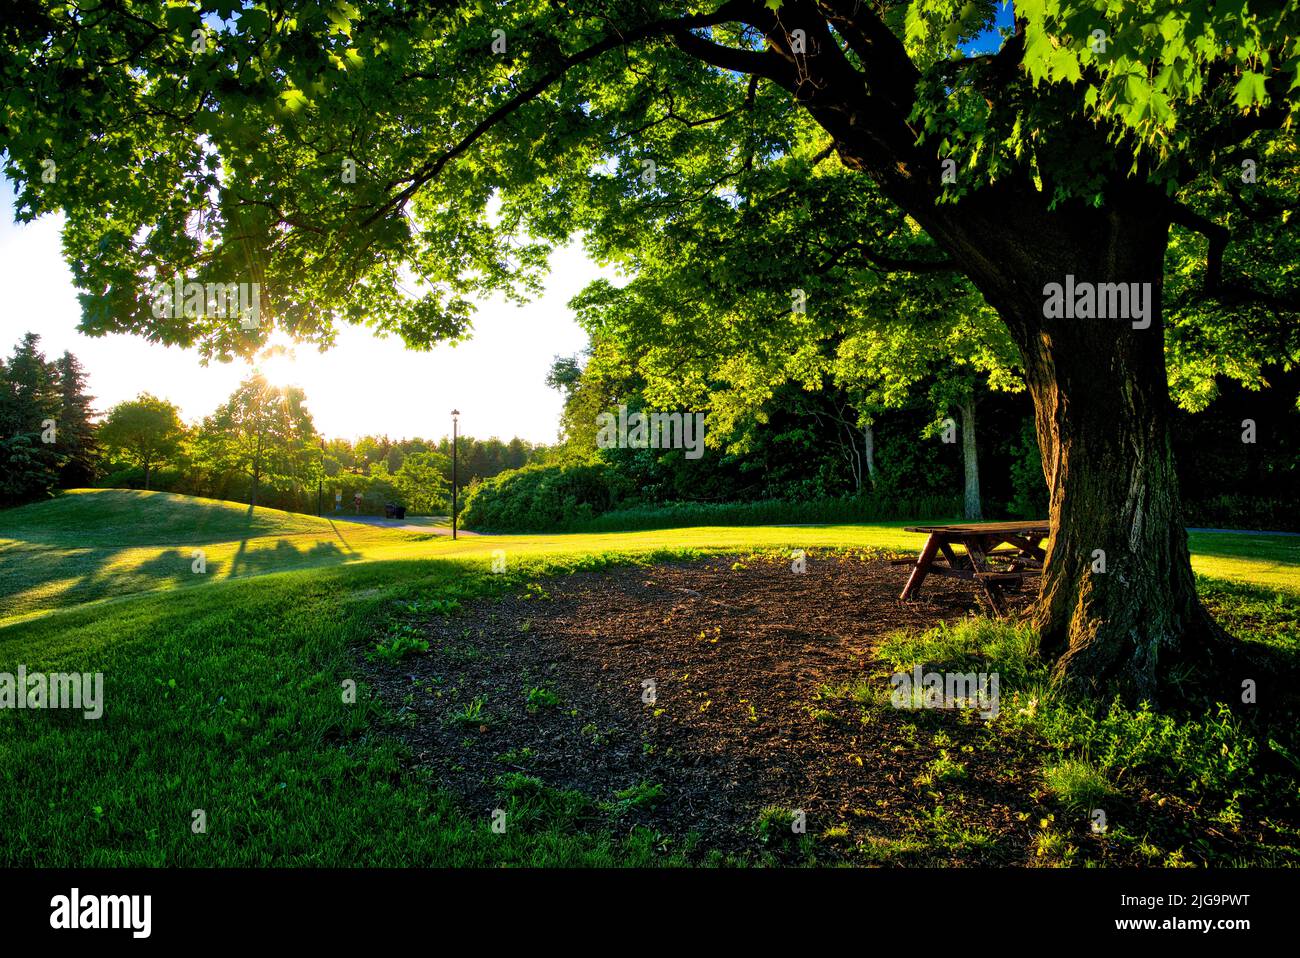 Morning sunlight shines through the maple tree in the park with the park bench Stock Photo